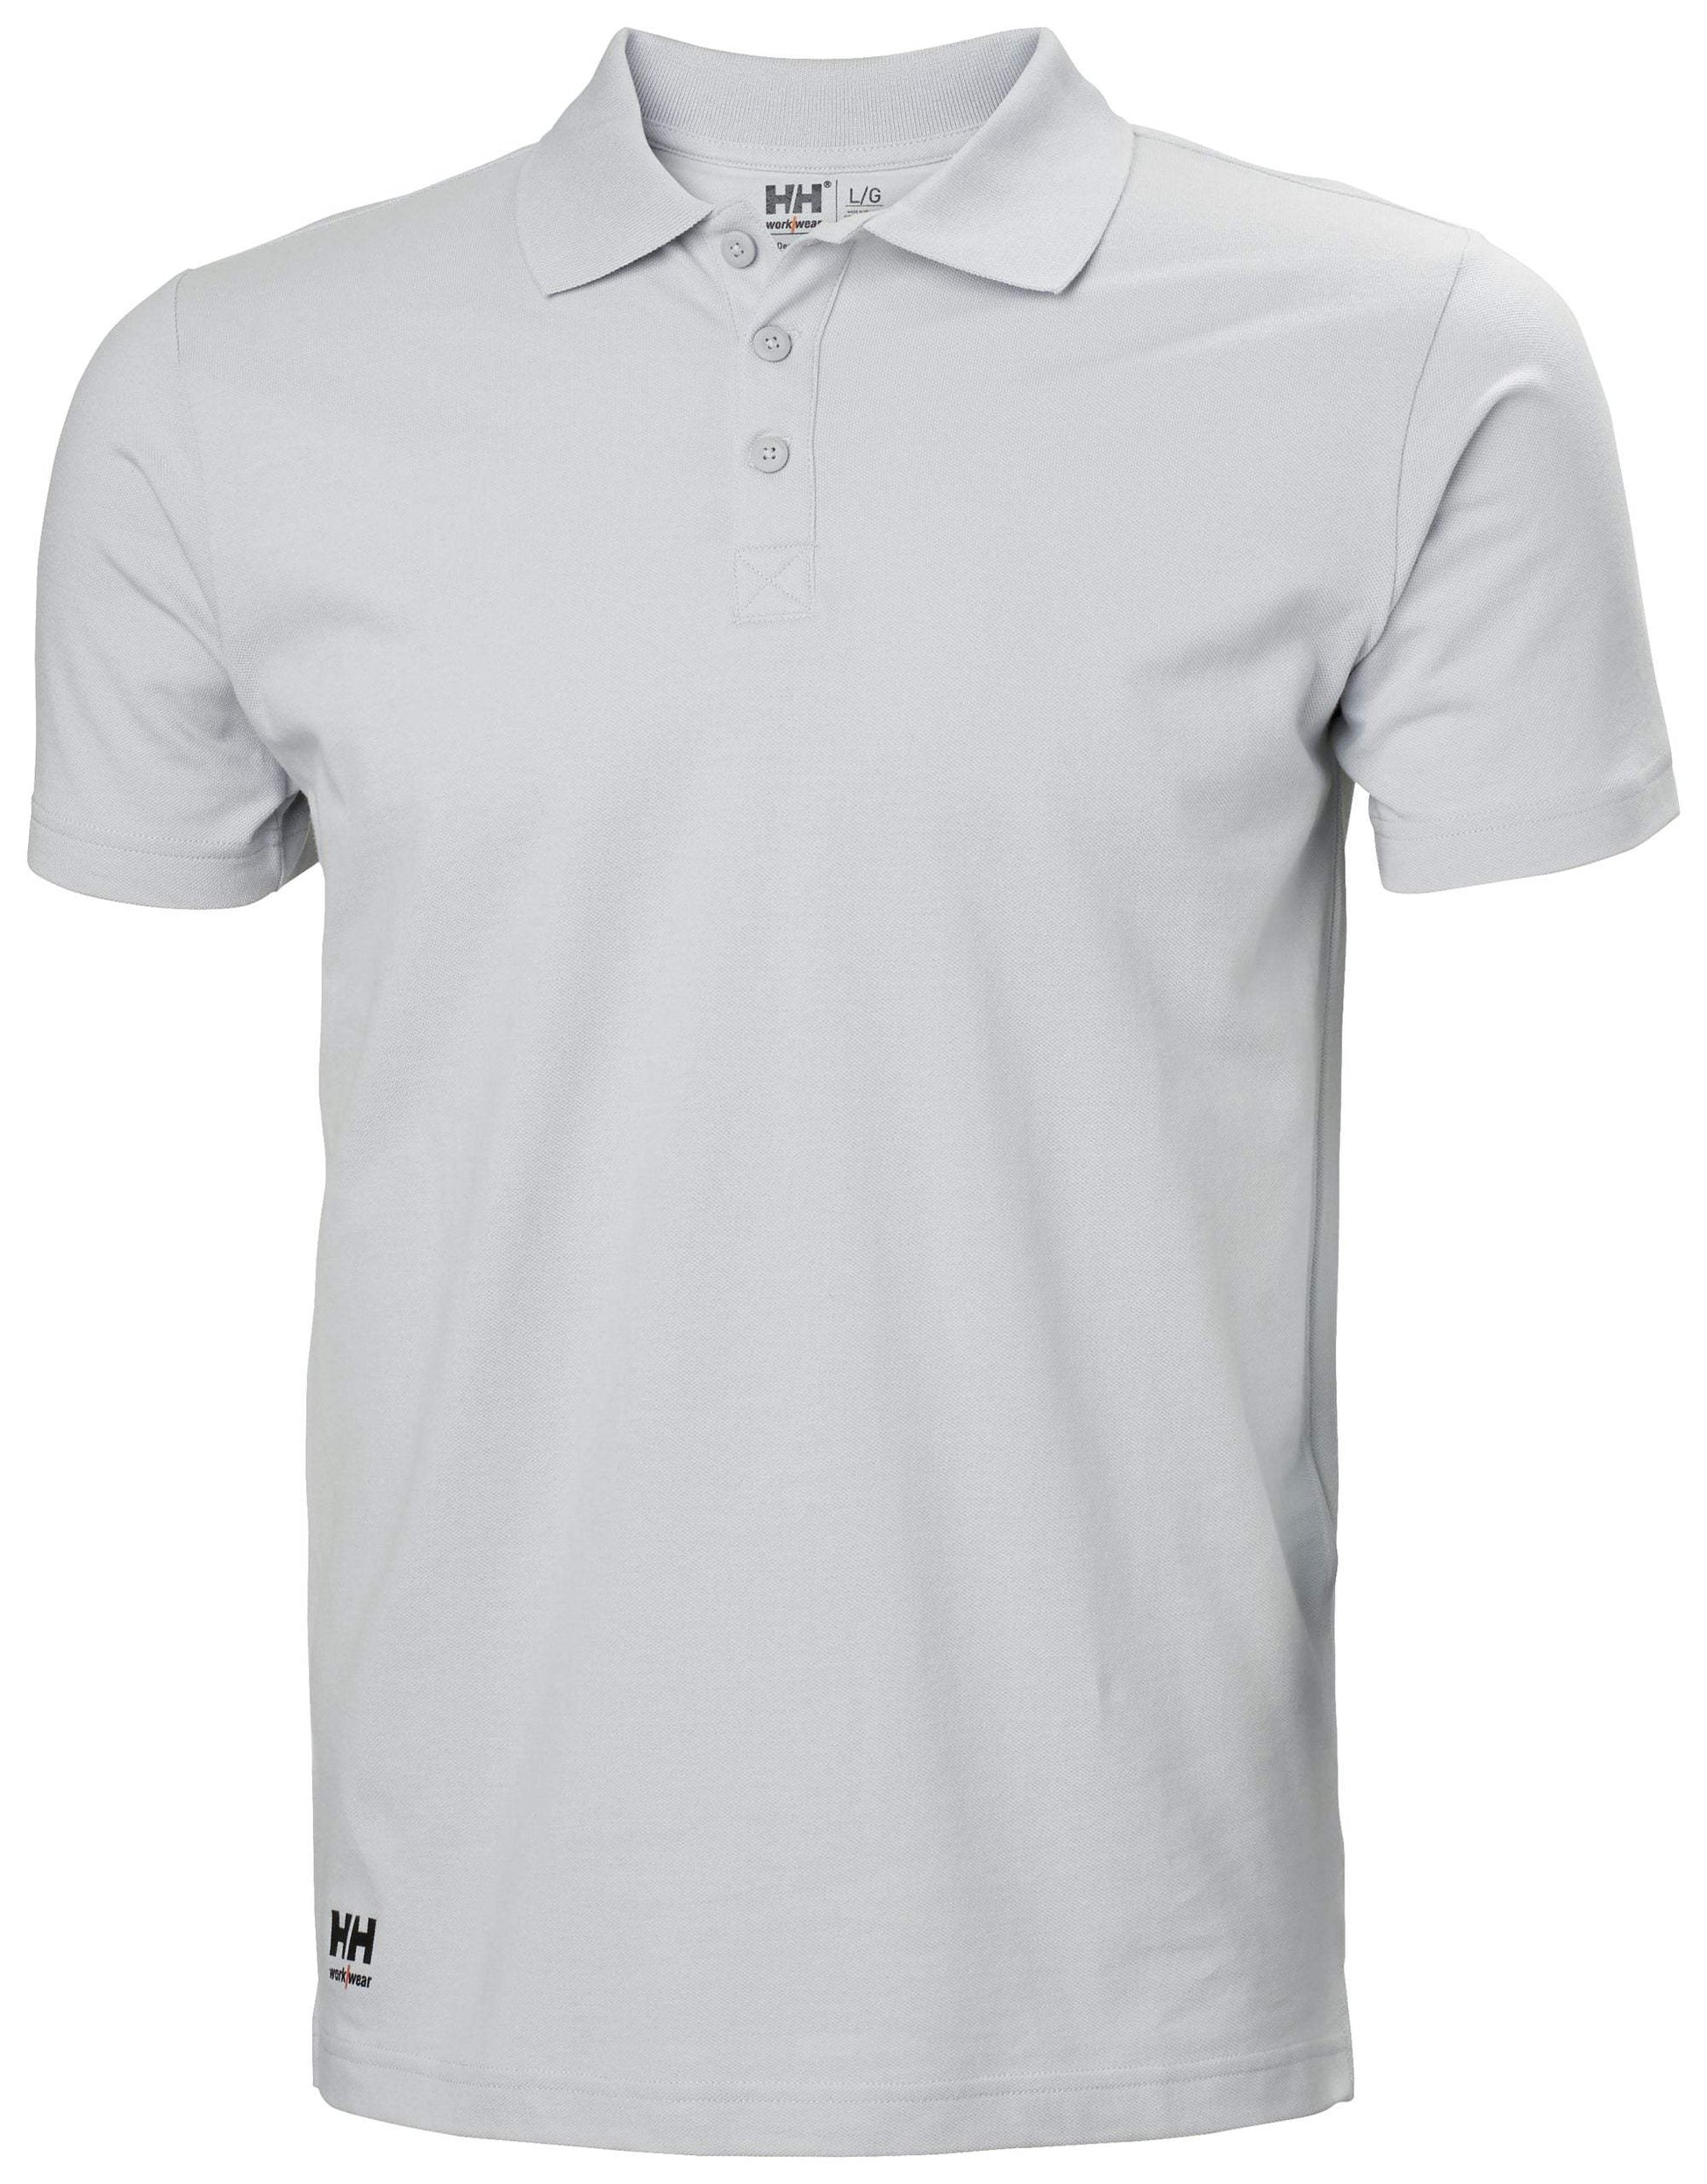 Helly Hansen Men’s Classic Polo - The Luxury Promotional Gifts Company Limited